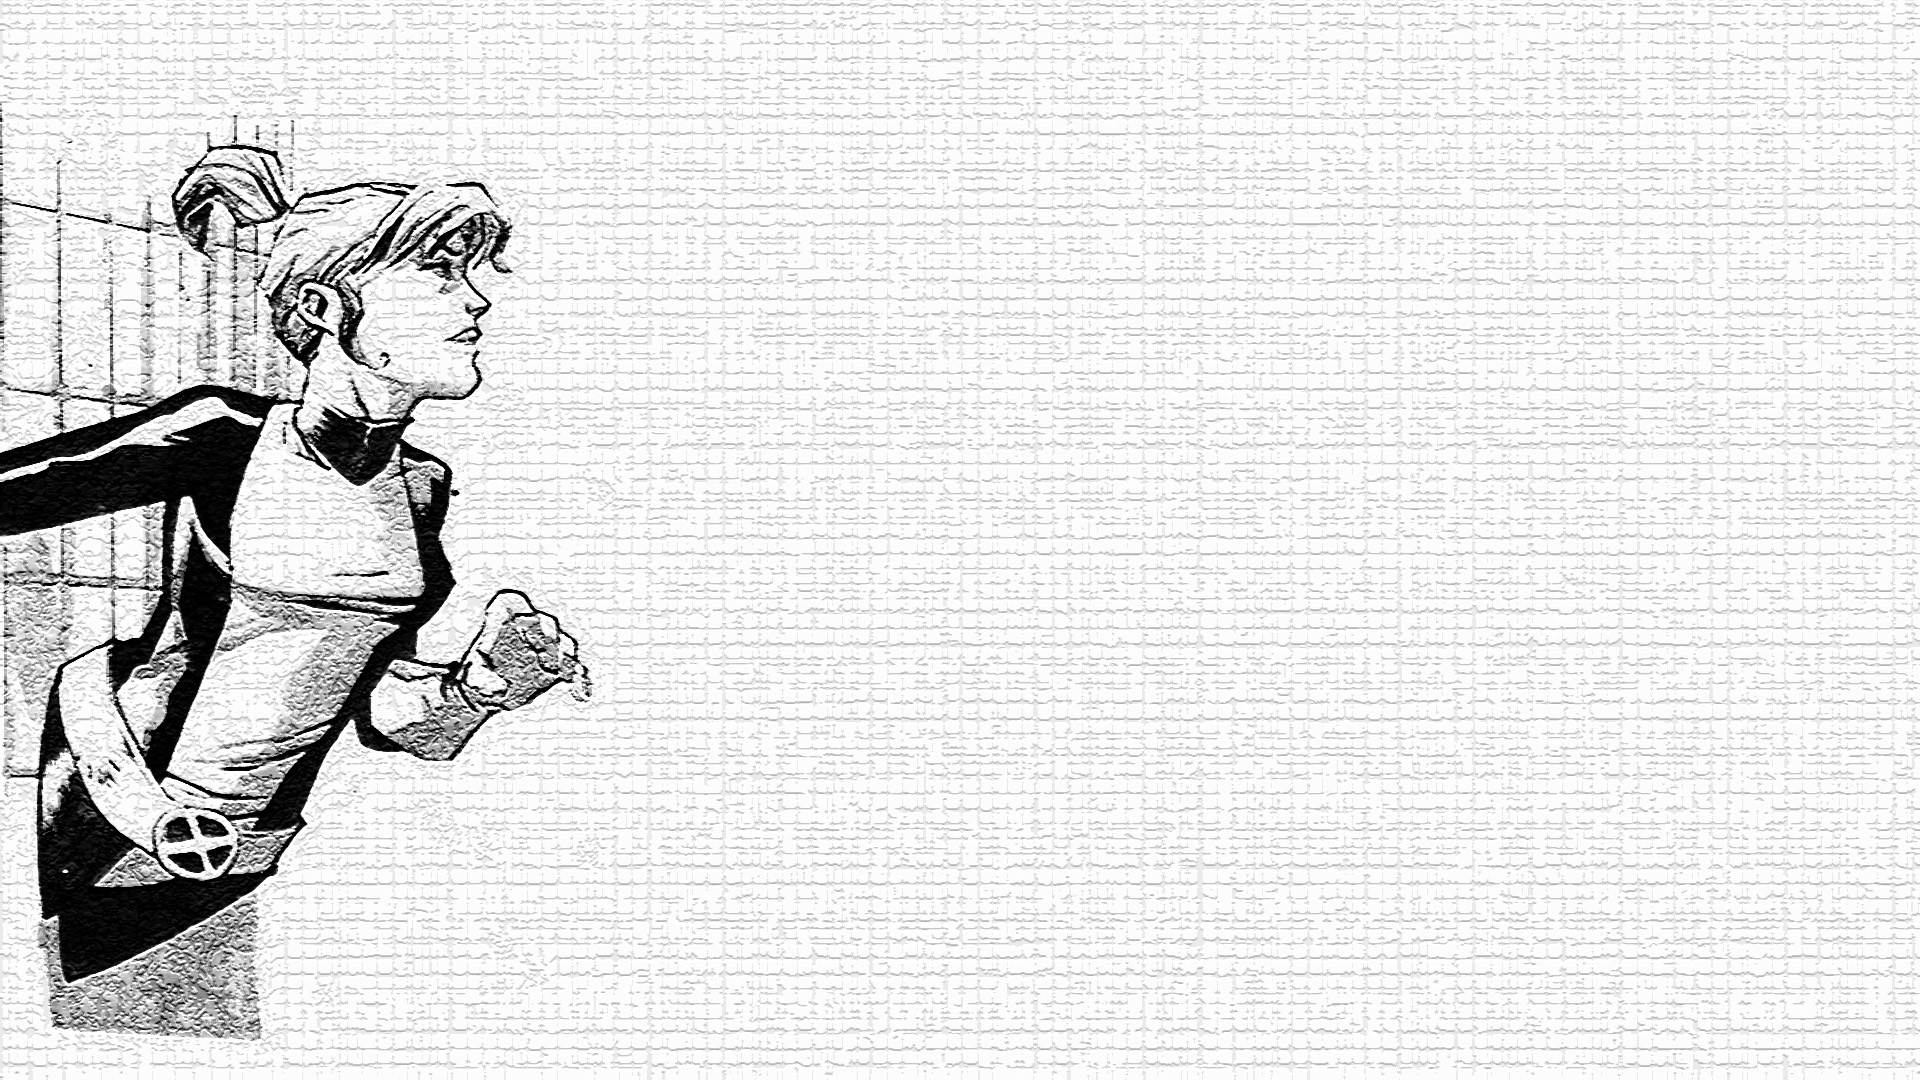 Comics Kitty Pryde HD Wallpaper | Background Image